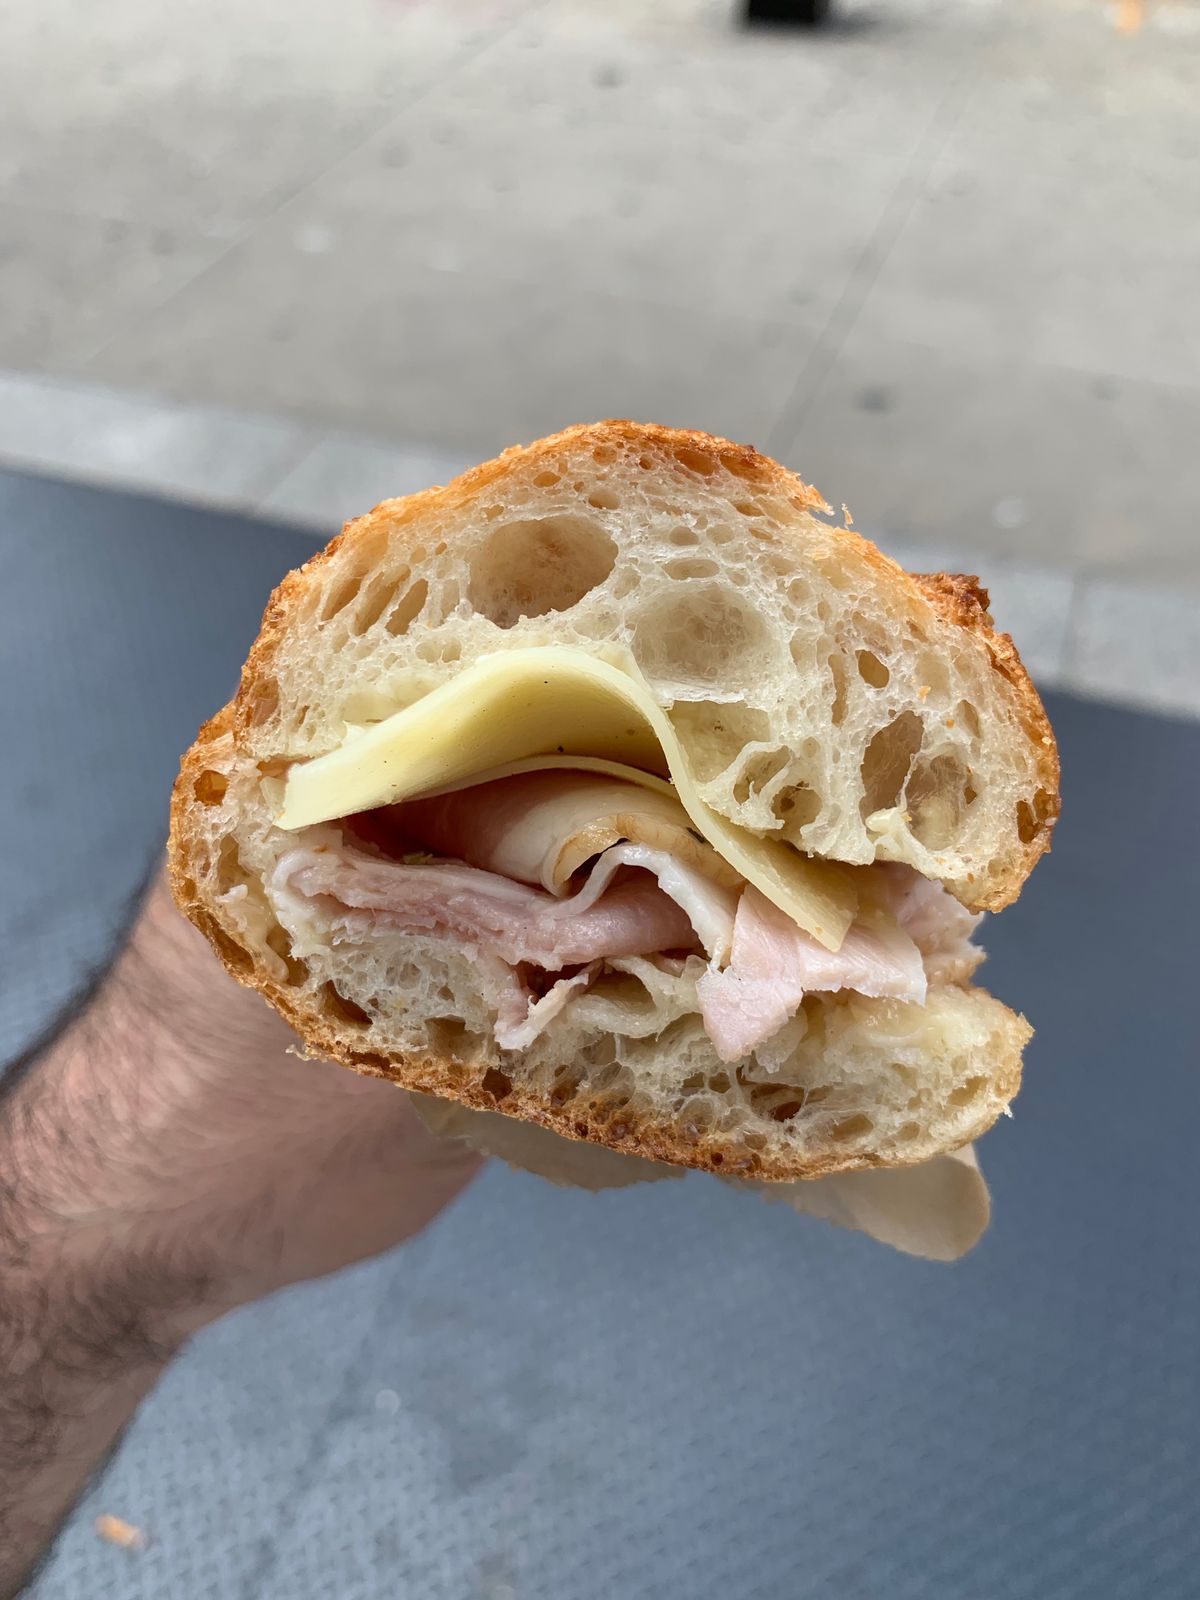 The side view of a ham-and-cheese baguette from Arcade Bakery